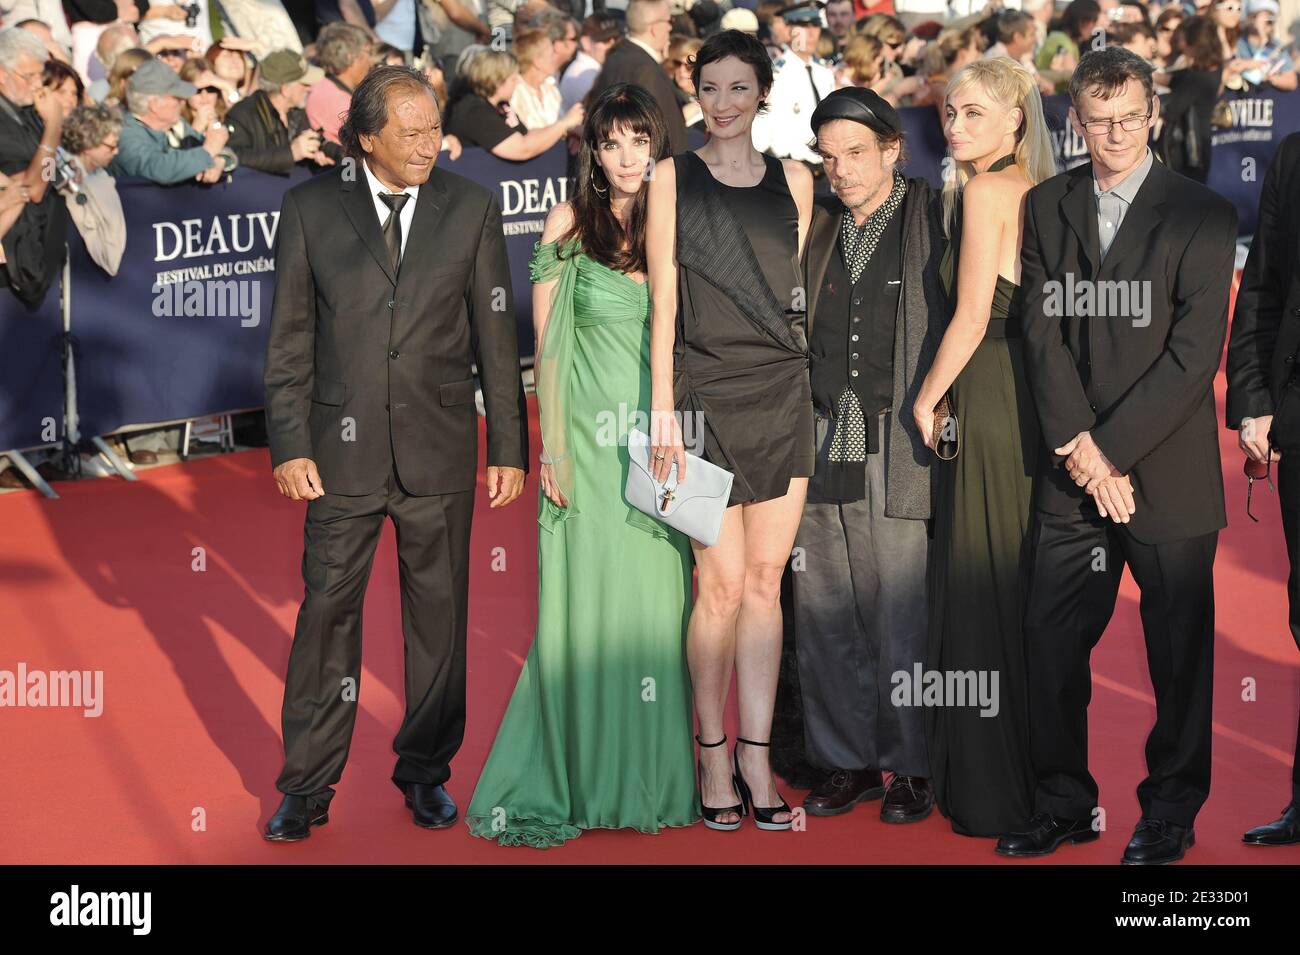 Members of the Feature Films Jury (L-R) French director Tony Gatlif, French actress and director Christine Citti, French actress Jeanne Balibar, French actor Denis Lavant, French actress and president of the jury Emmanuelle Beart and French director Lucas Belvaux arriving for the opening ceremony and the screening of 'Brazil Director's Cut' directed by American-born British director Terry Gilliam, on the first day of the 36th American Film Festival, in Deauville, northwestern France on September 3, 2010. Photo by Thierry Orban/ABACAPRESS.COM Stock Photo